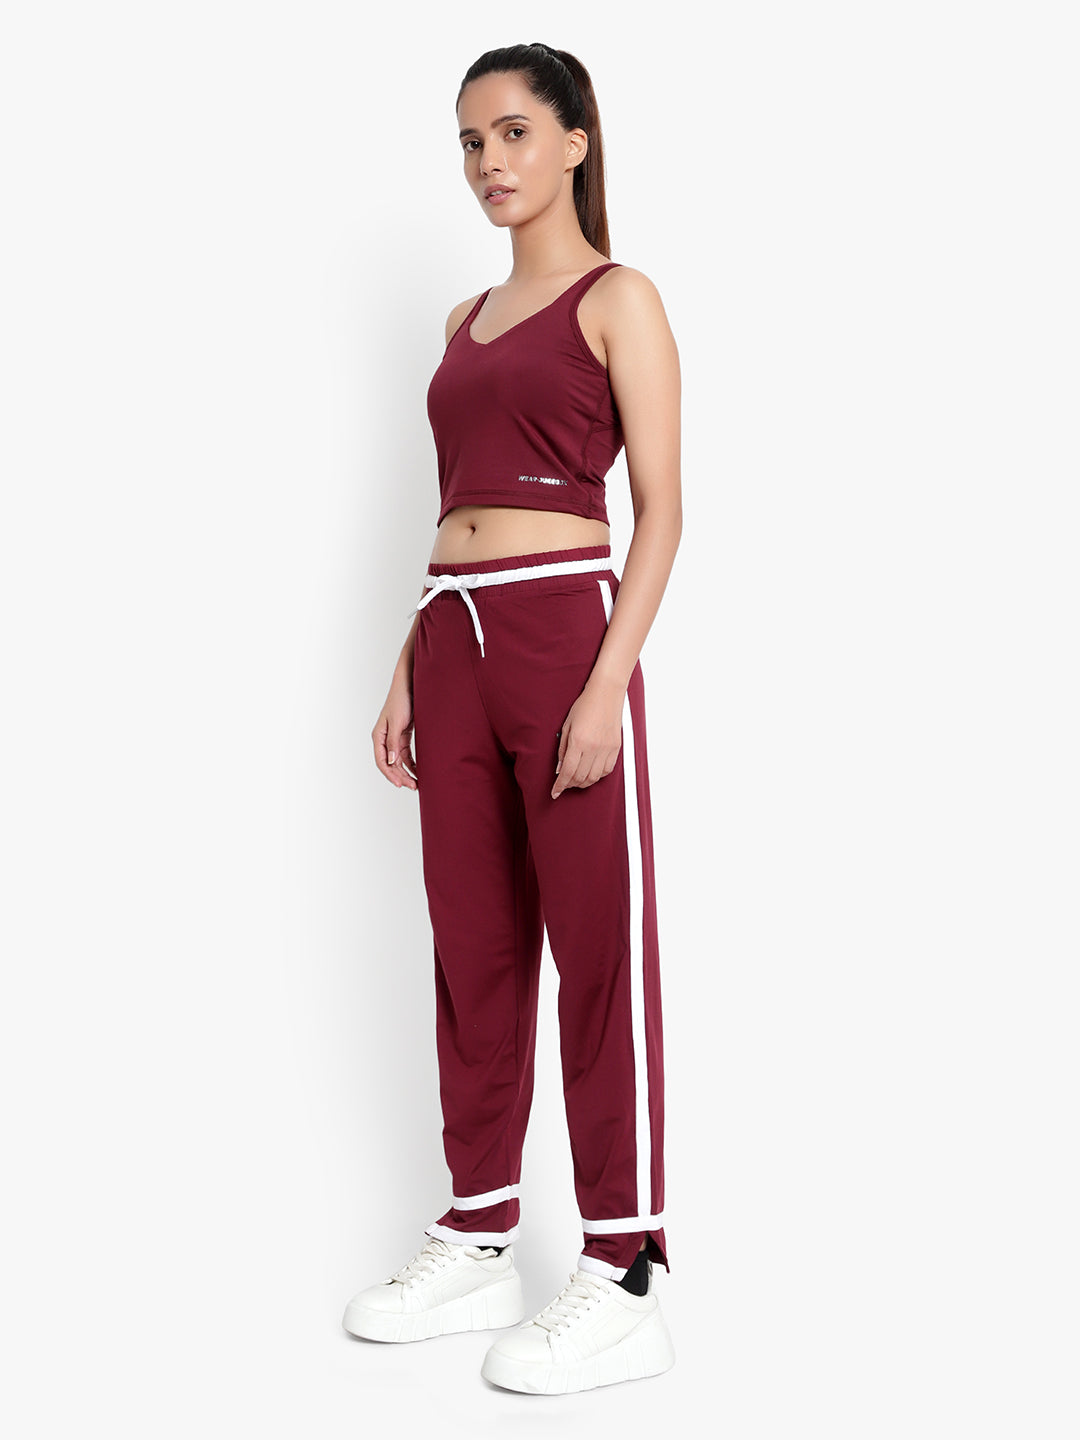 Axis Tank Top & Track Pant - Maroon